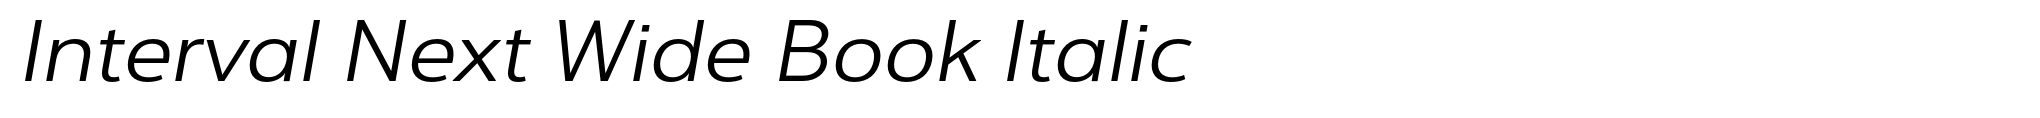 Interval Next Wide Book Italic image